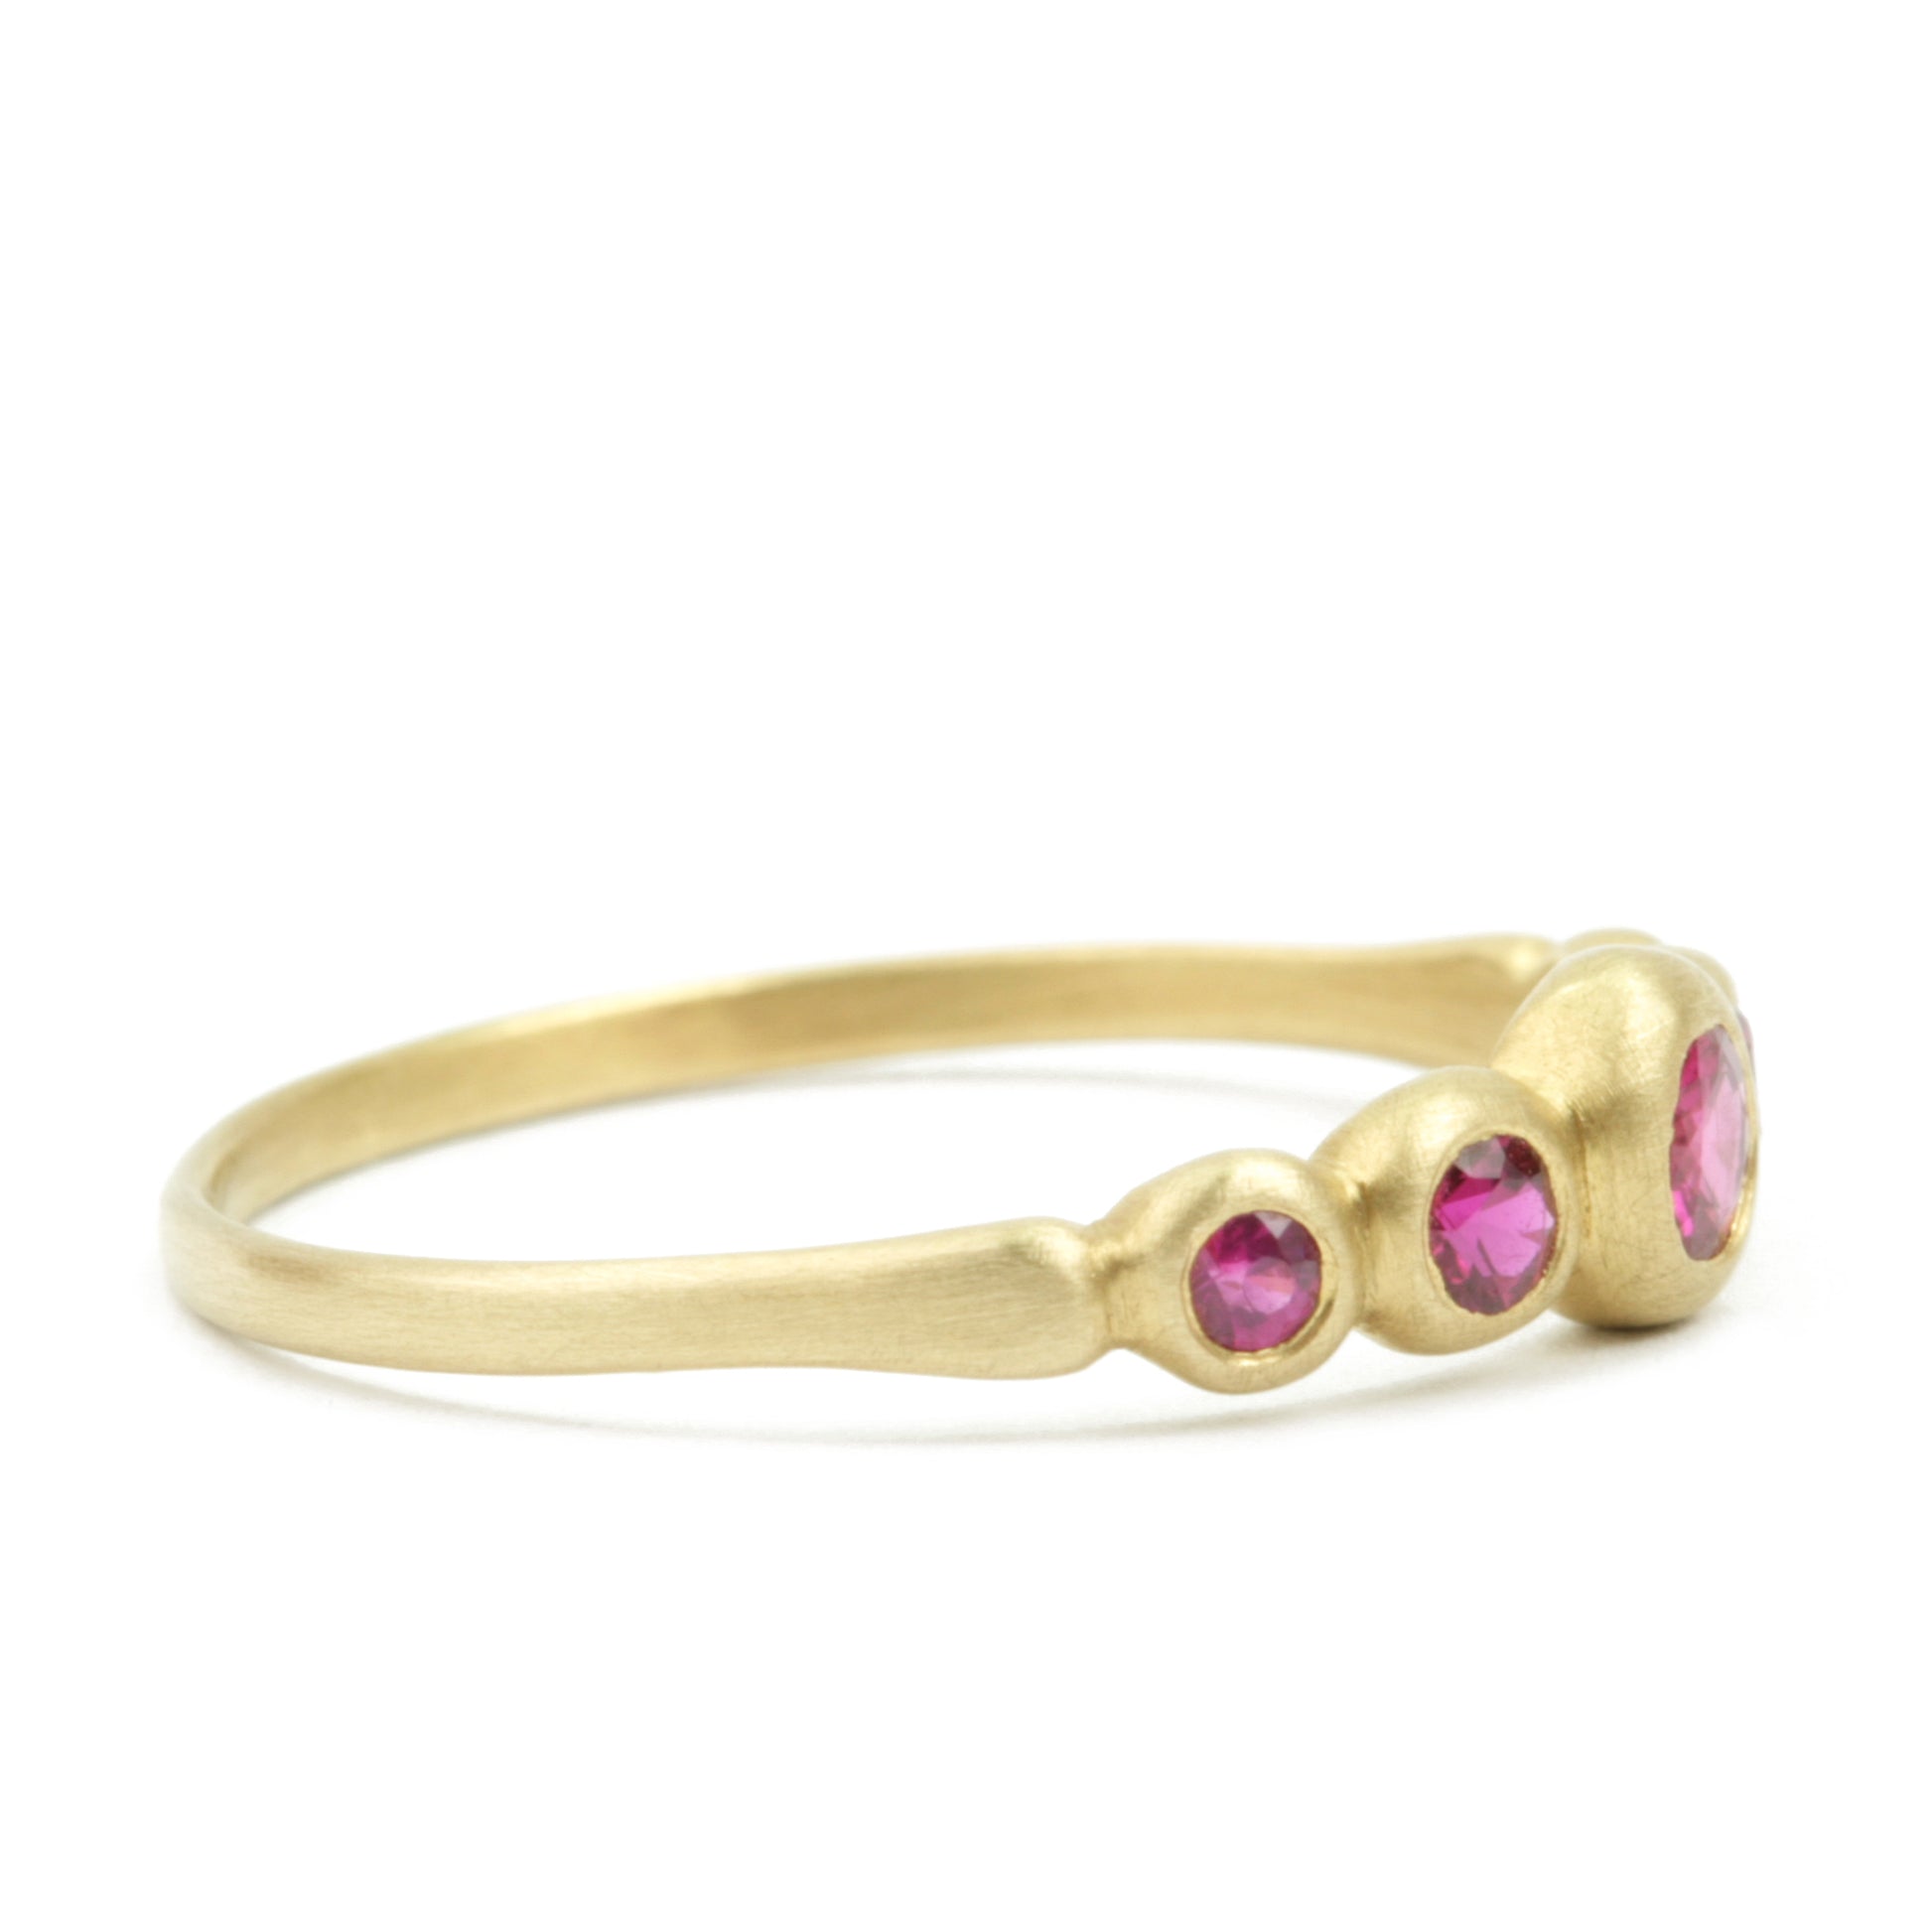 Kima Ring with Rubies, side view